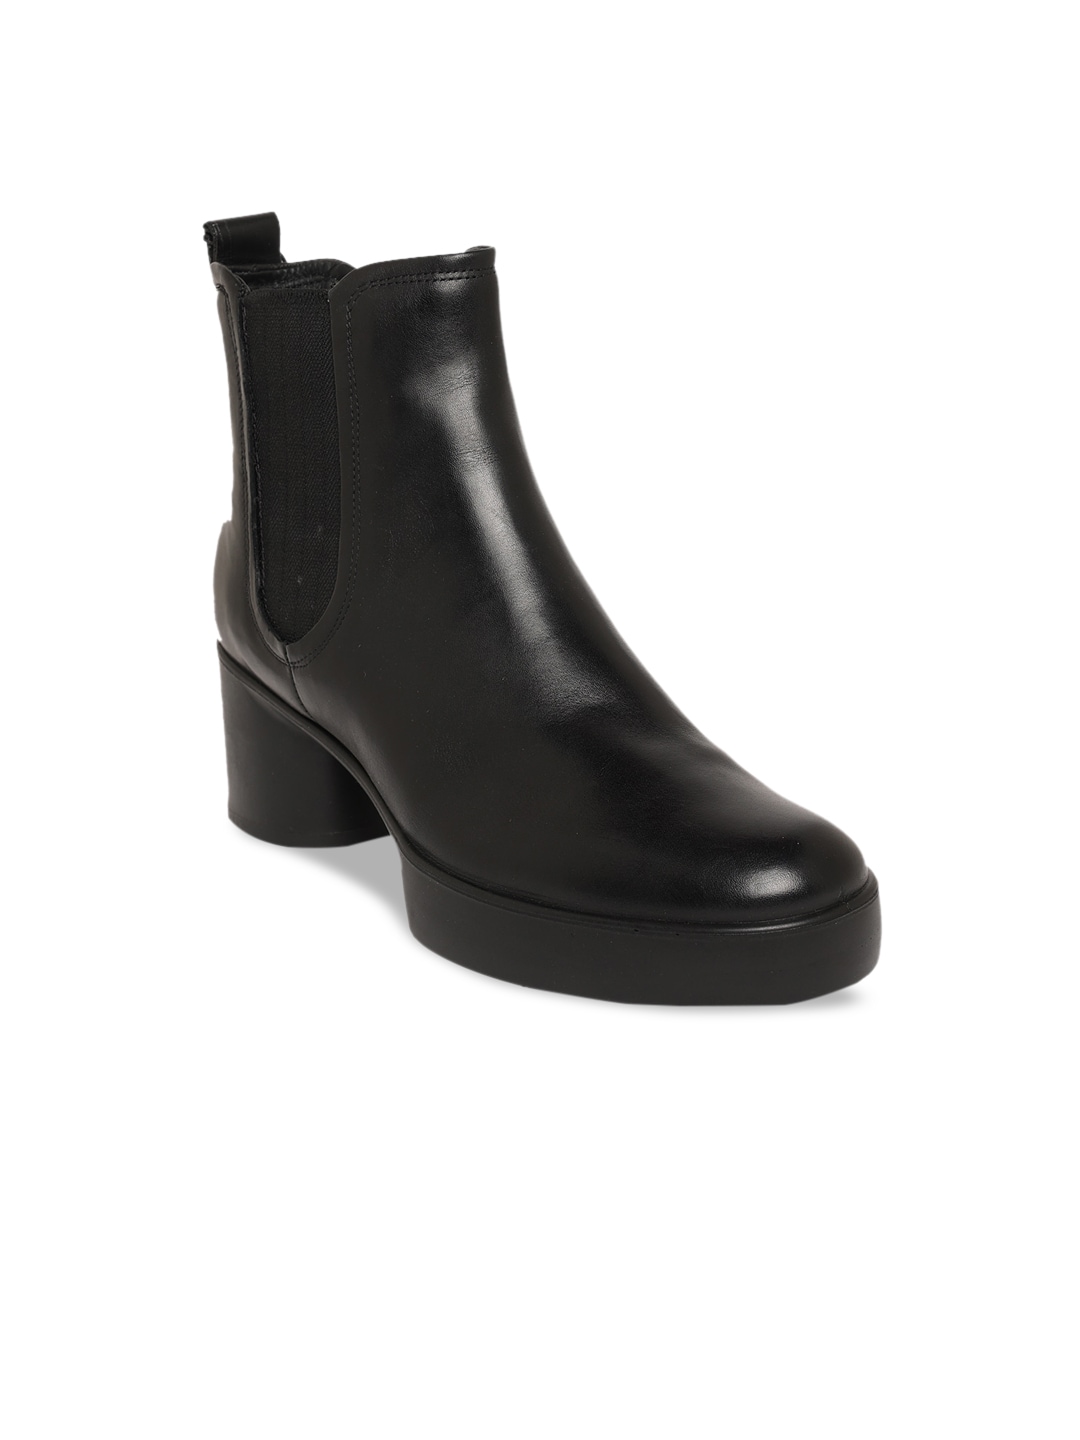 ECCO Shape Sculpted Motion 35 Women Black Textured Leather Contemporary Flat Boots Price in India